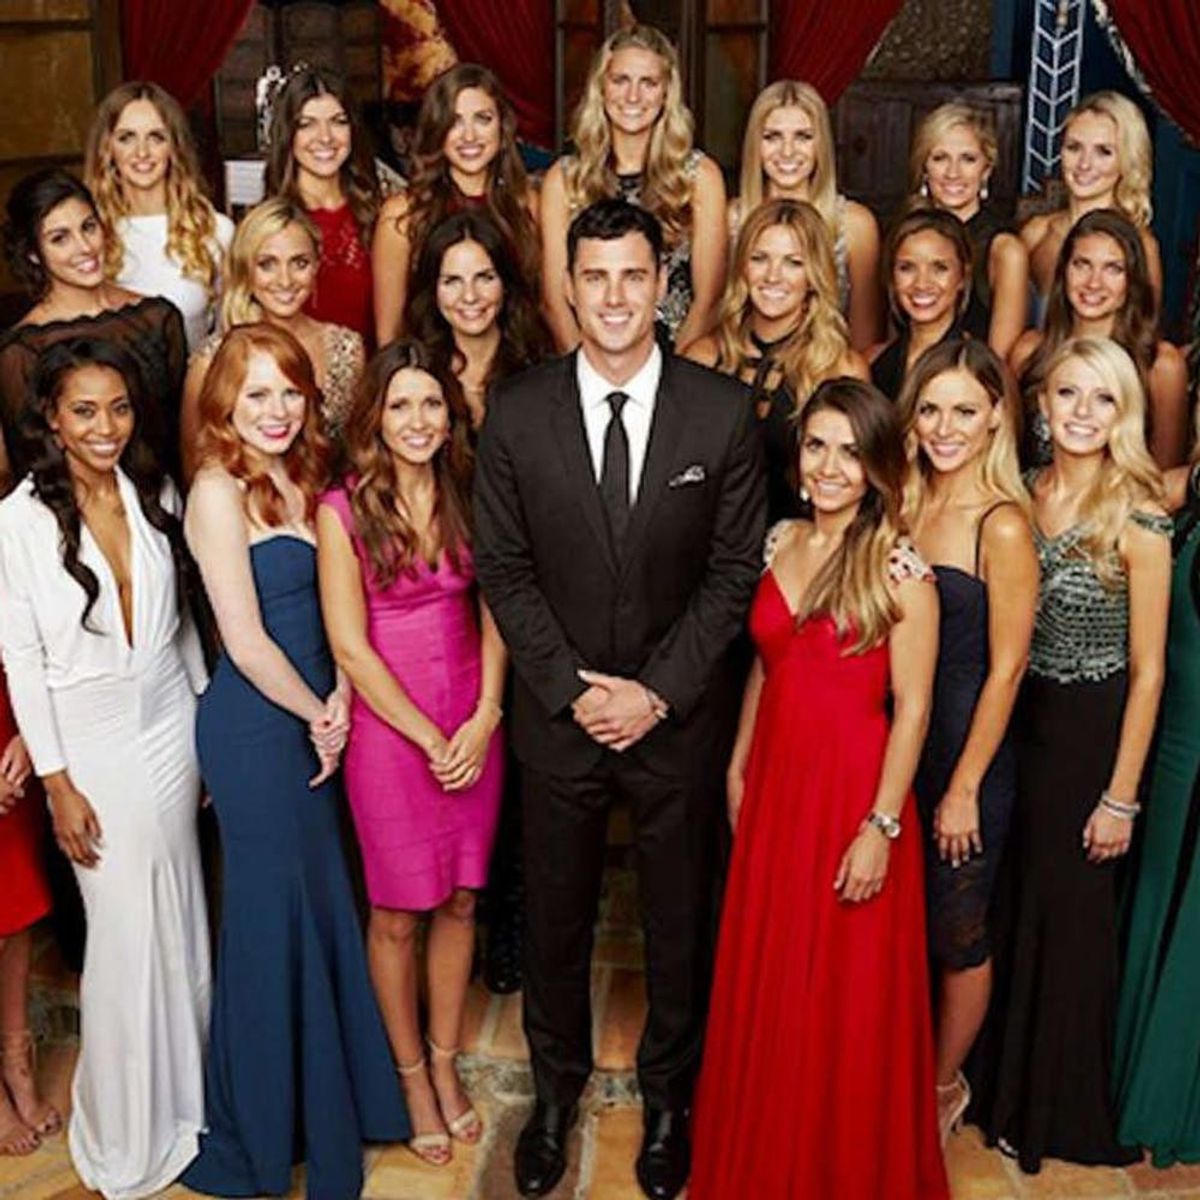 6 Things You Wouldn’t Expect About Being a Bachelor Contestant